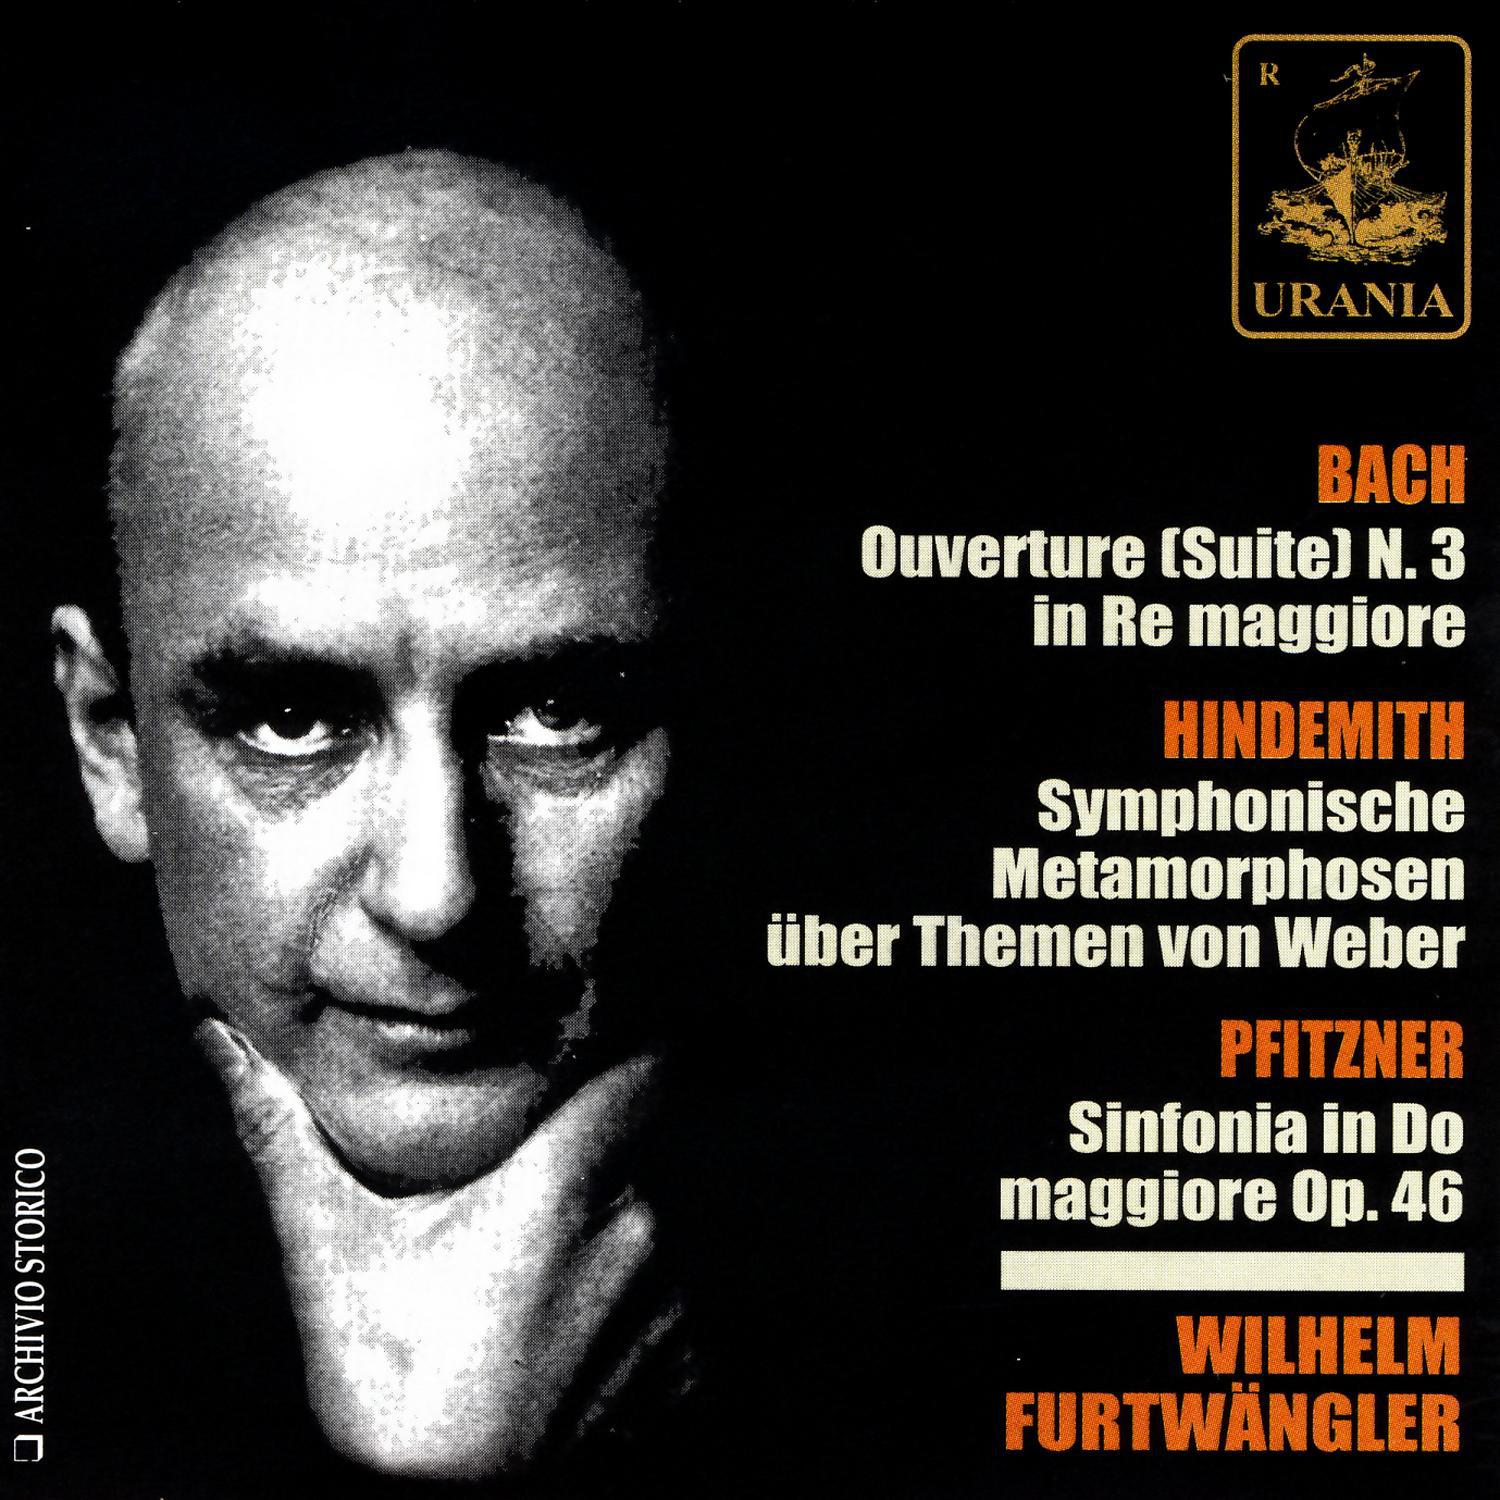 Bach: Ouverture No. 3 - Hindemith: Symphonische Metamorphosen - Pfitzner: Sinfonia in Do Maggiore, Op. 46